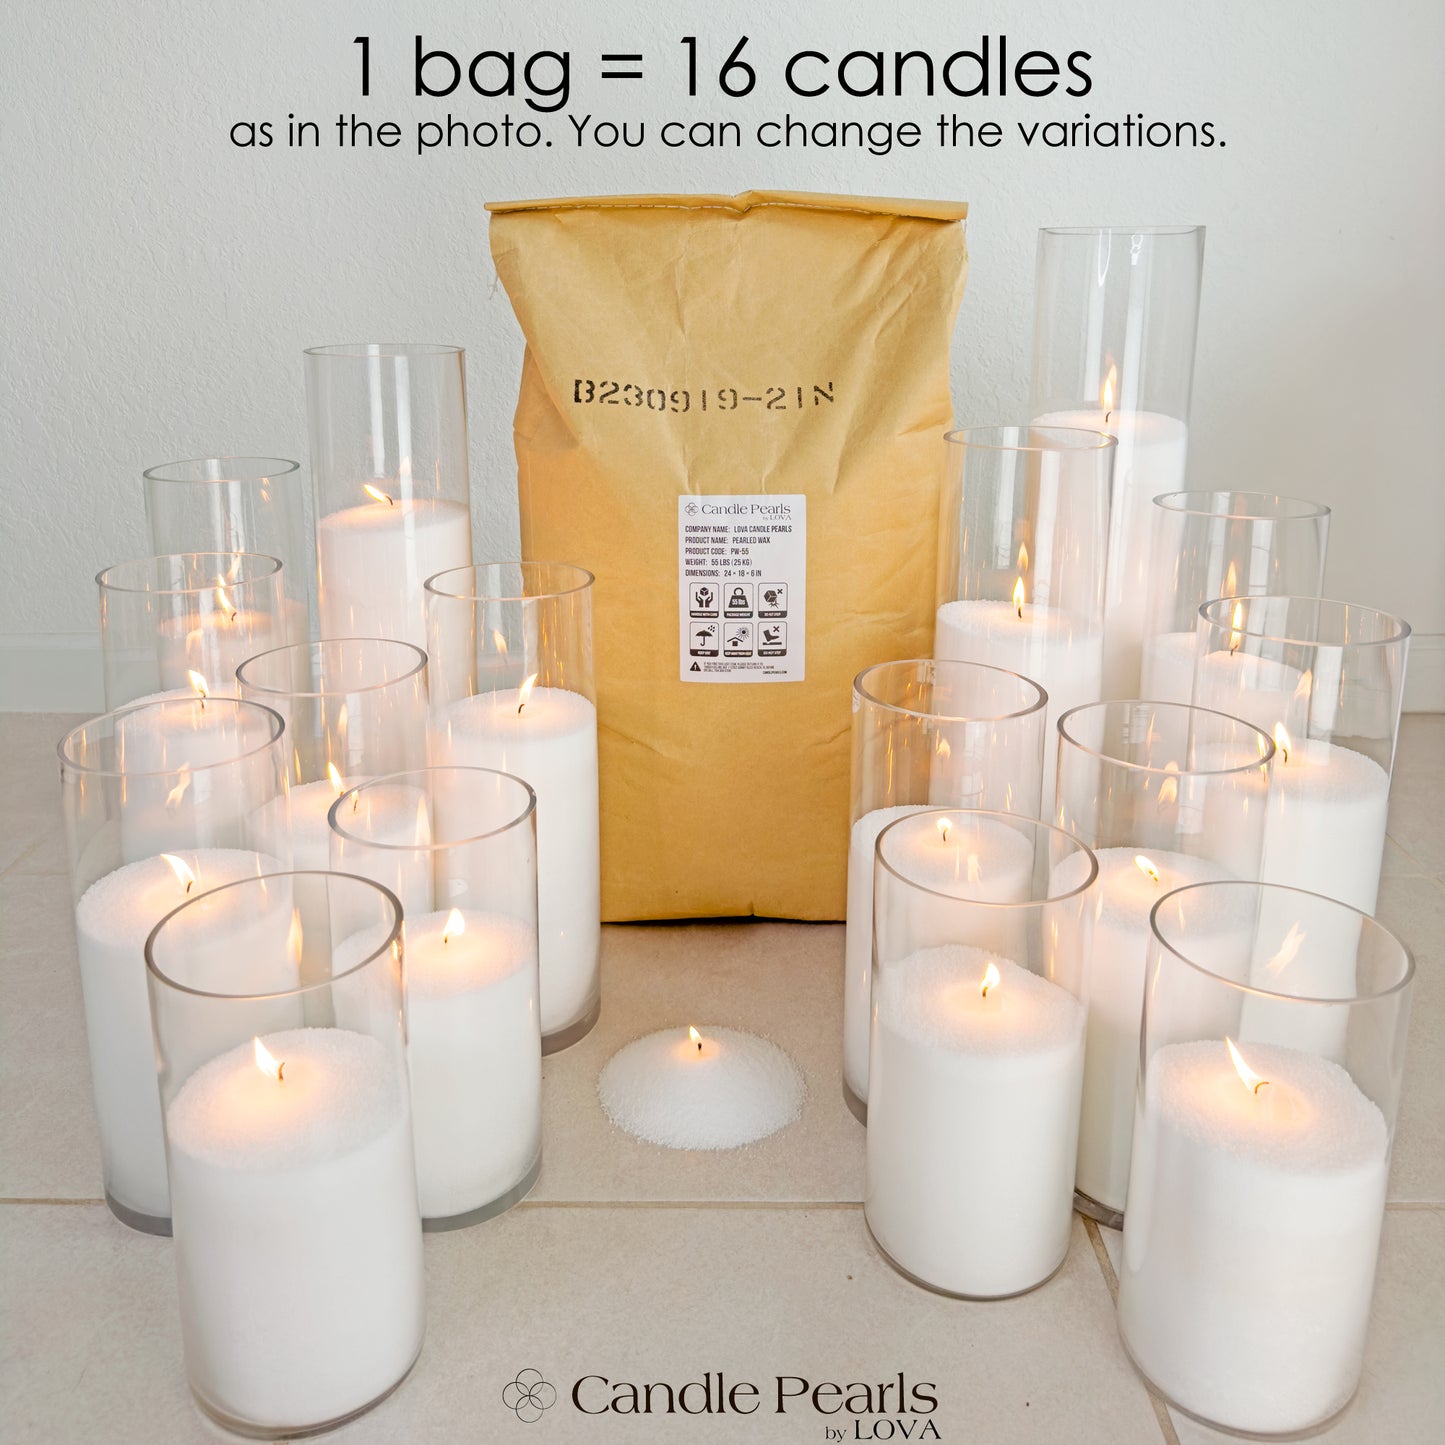 LOVA Candle Pearls™ Pearled Wax 55 lbs (25kg) - Candle Powder Sand Wax Candle Sand Candles Granulated Natural Plant Wax Self Melting Wedding +150 wicks